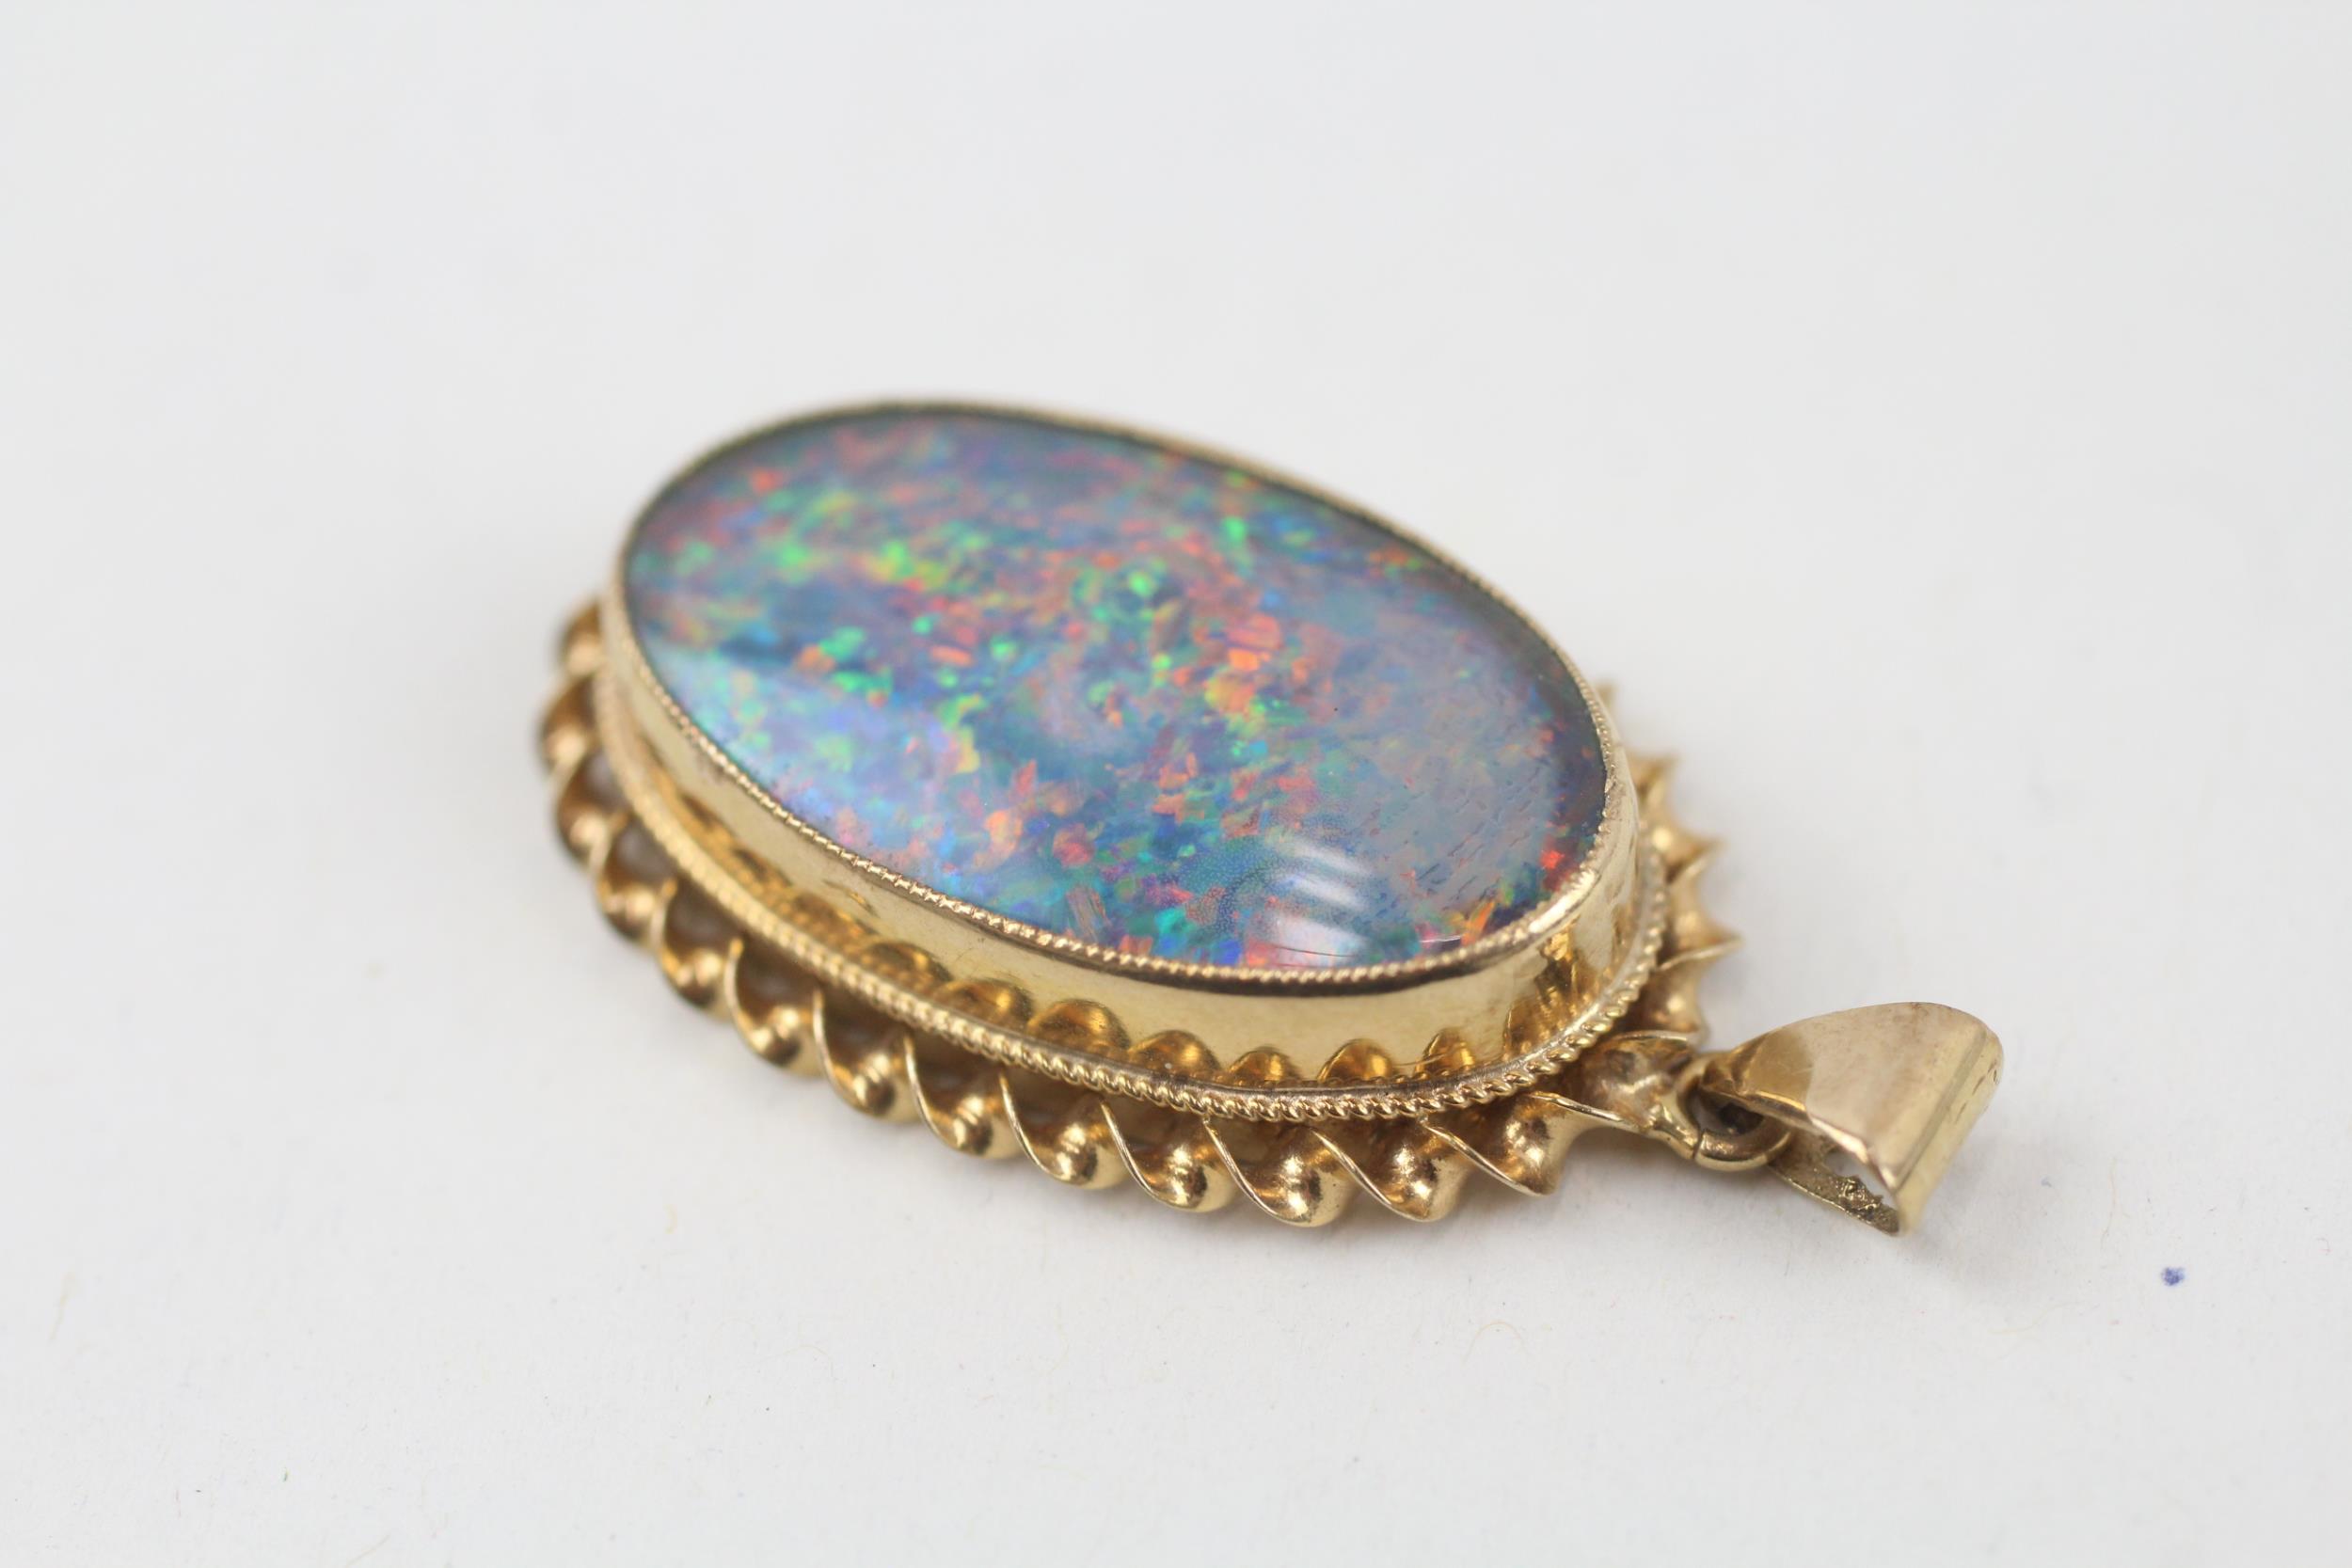 9ct gold oval opal triplet single stone pendant - 4.6 g - Image 3 of 7